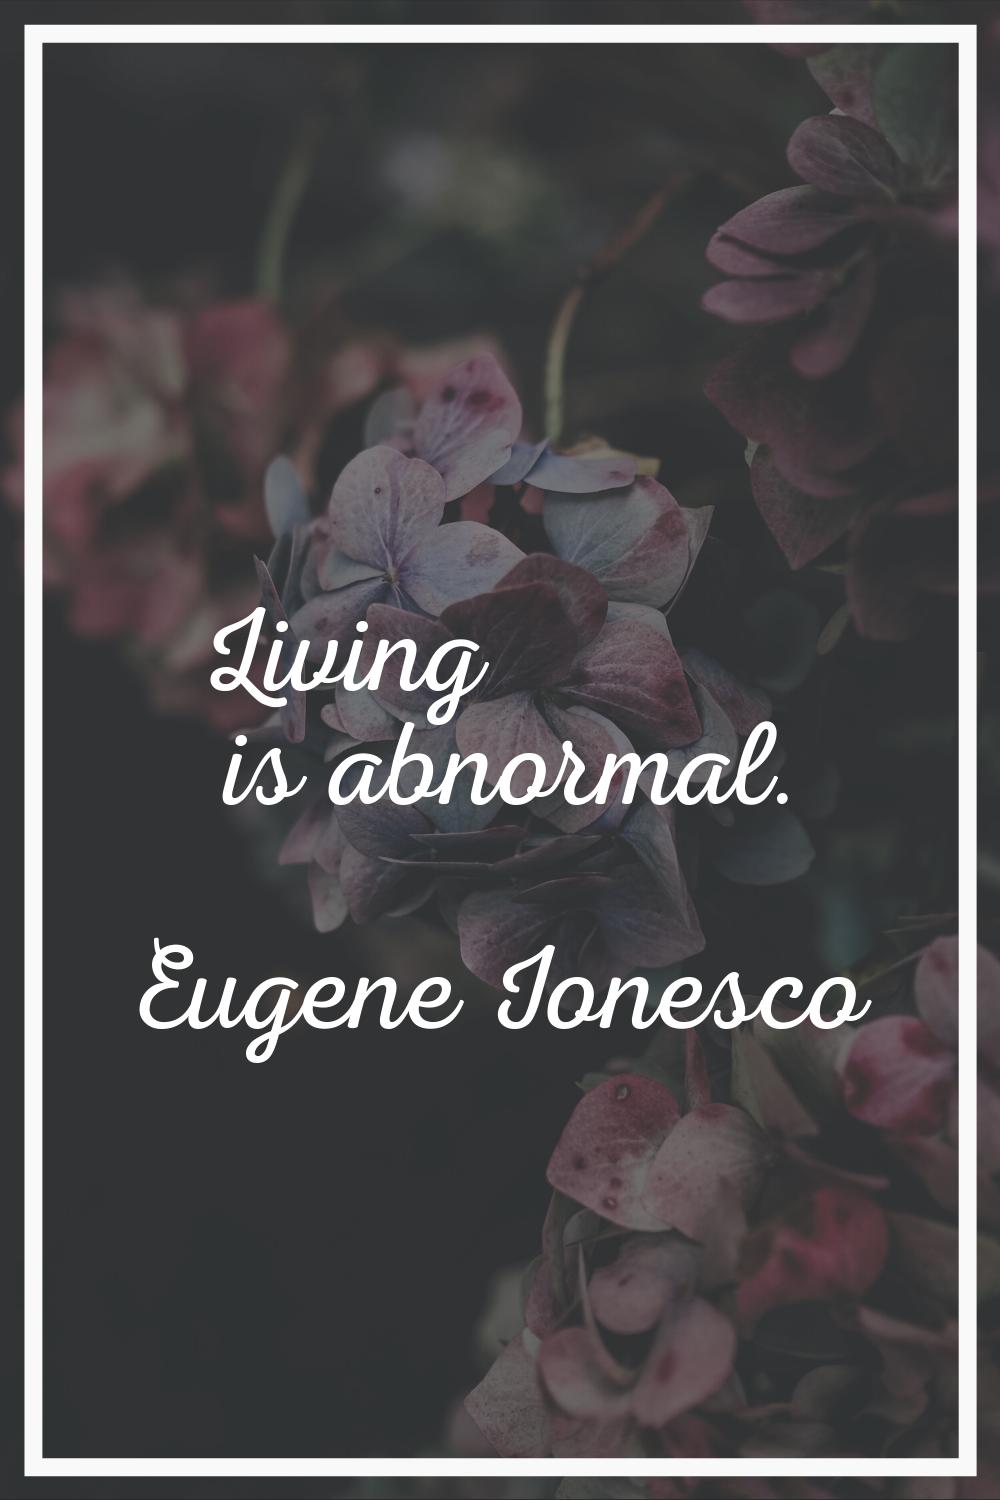 Living is abnormal.